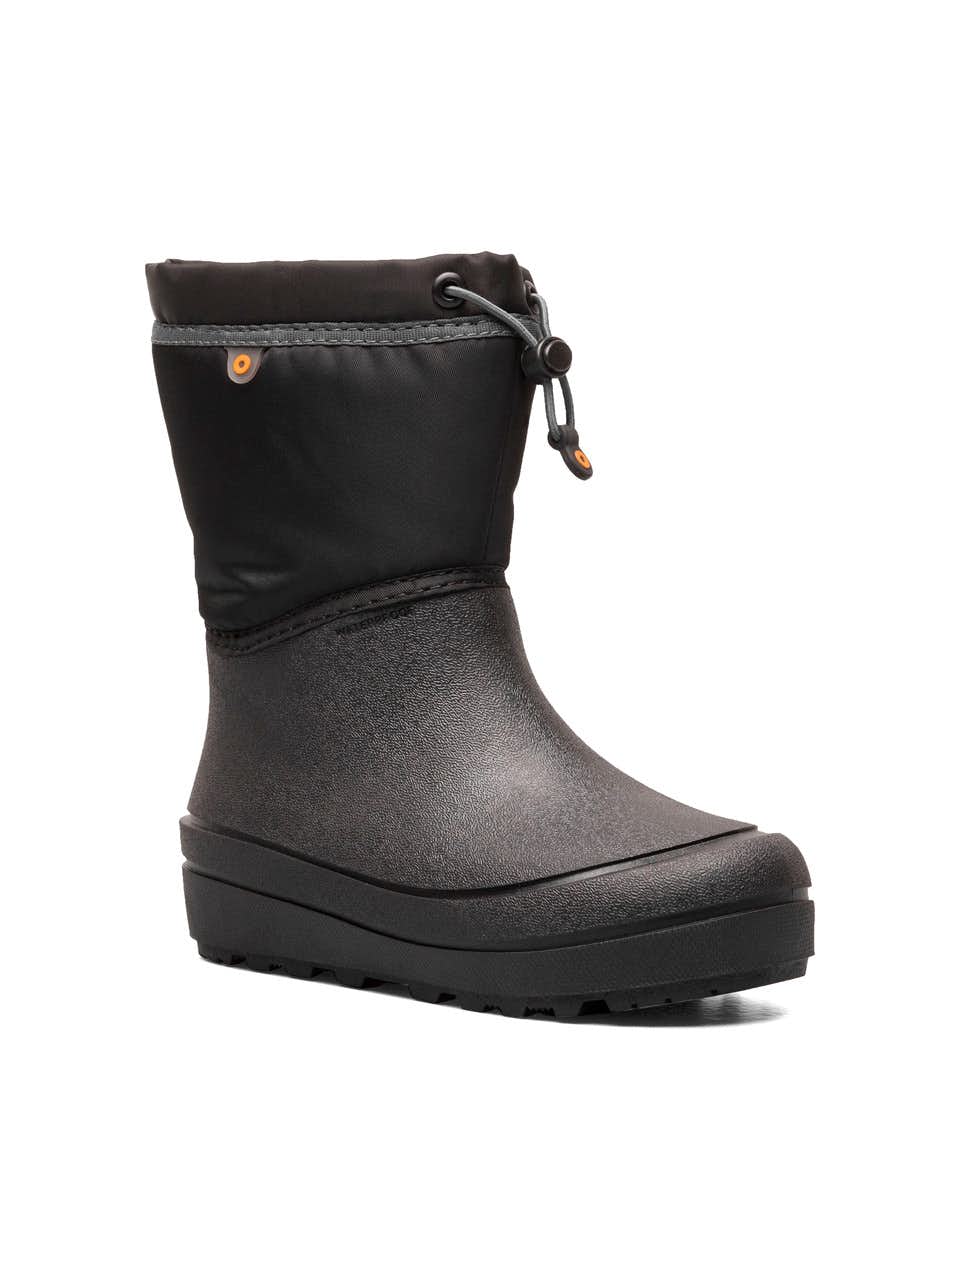 Snow Shell Boots Black